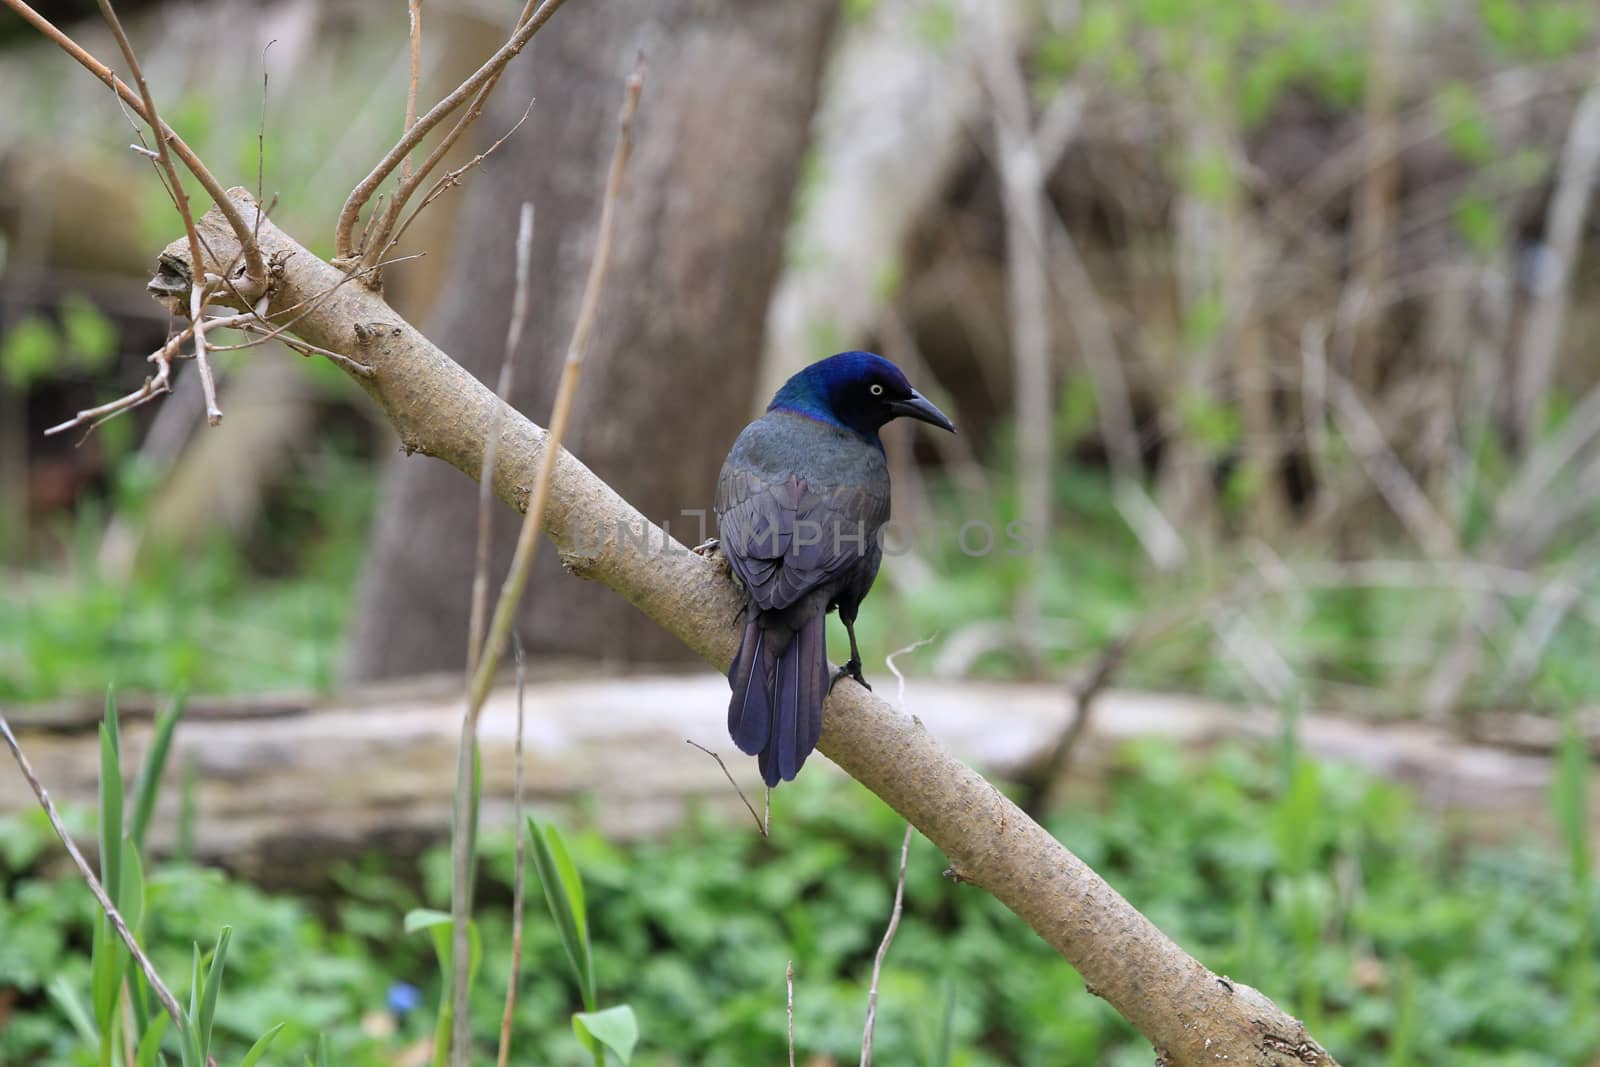 Common Grackle by framed